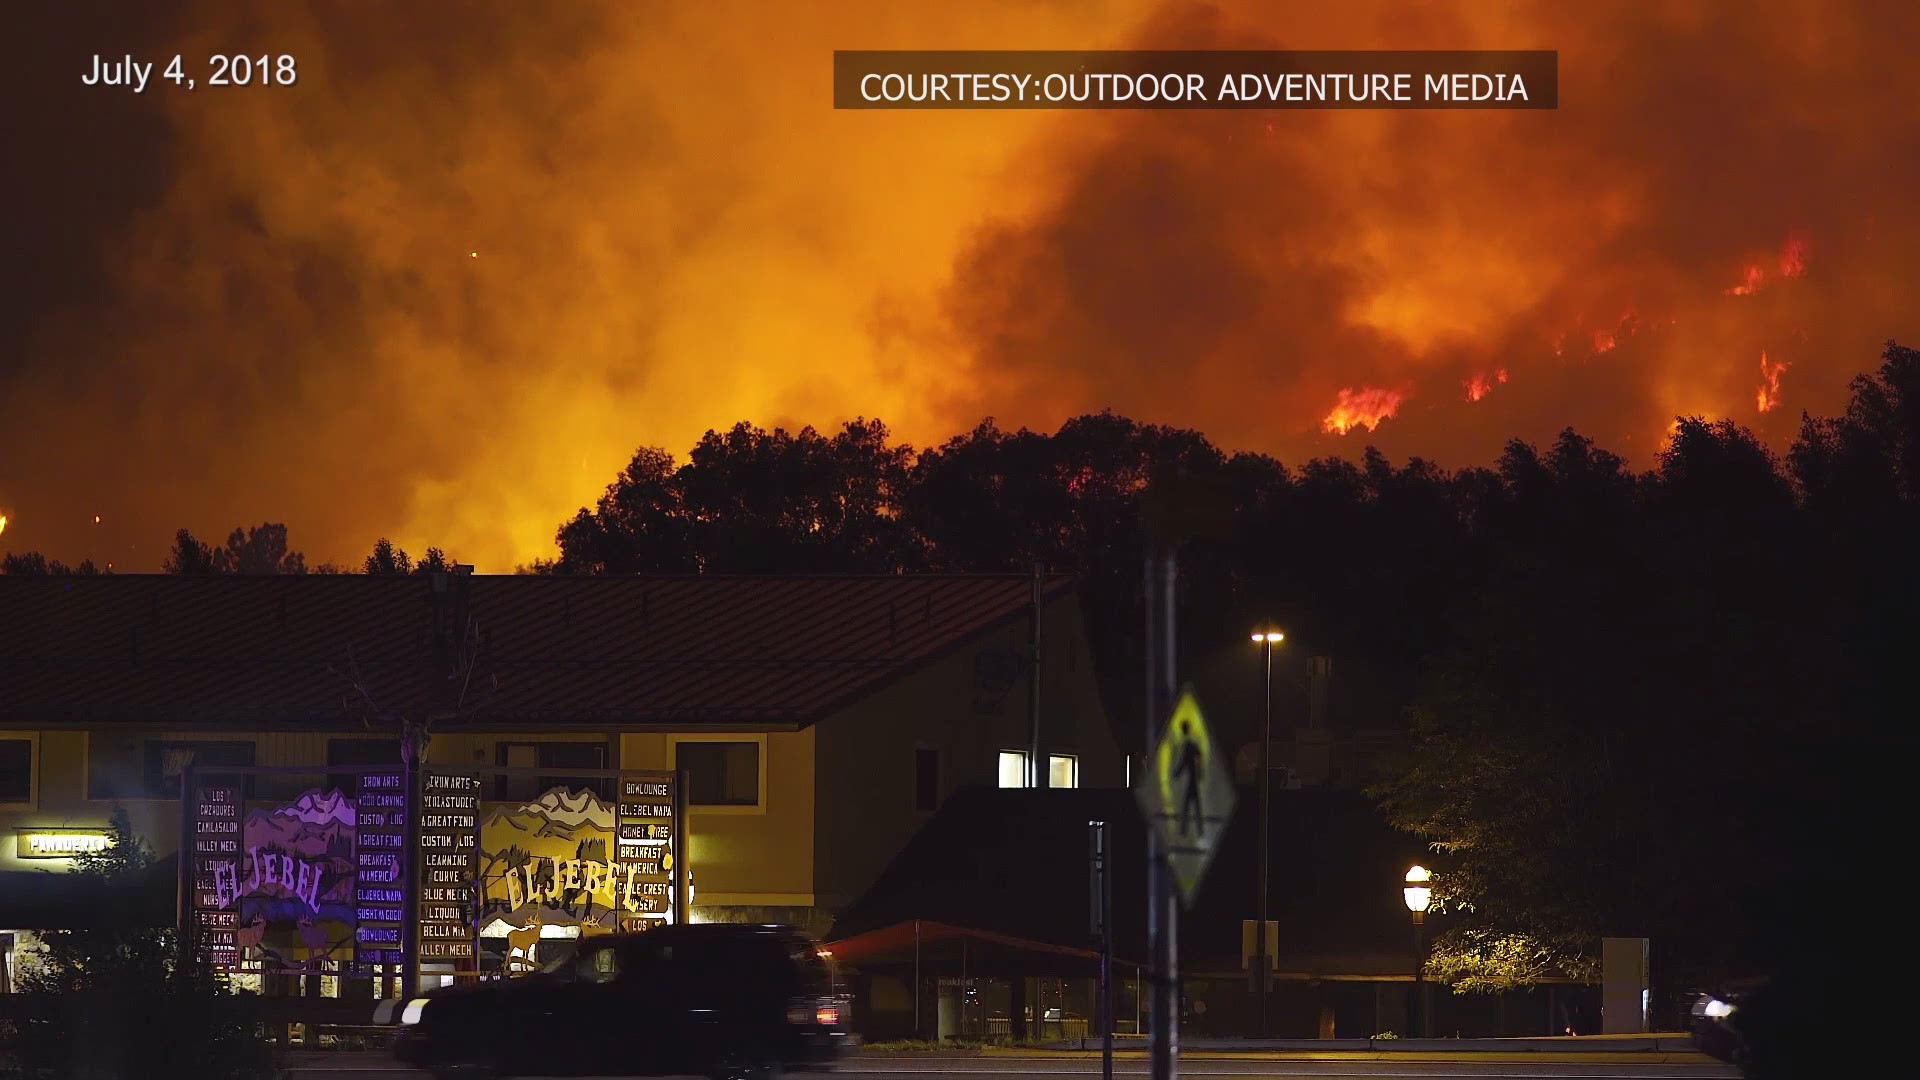 Barry Stevenson with Outside Adventure Media shot this video of the Lake Christine Fire late on the evening of July 4.